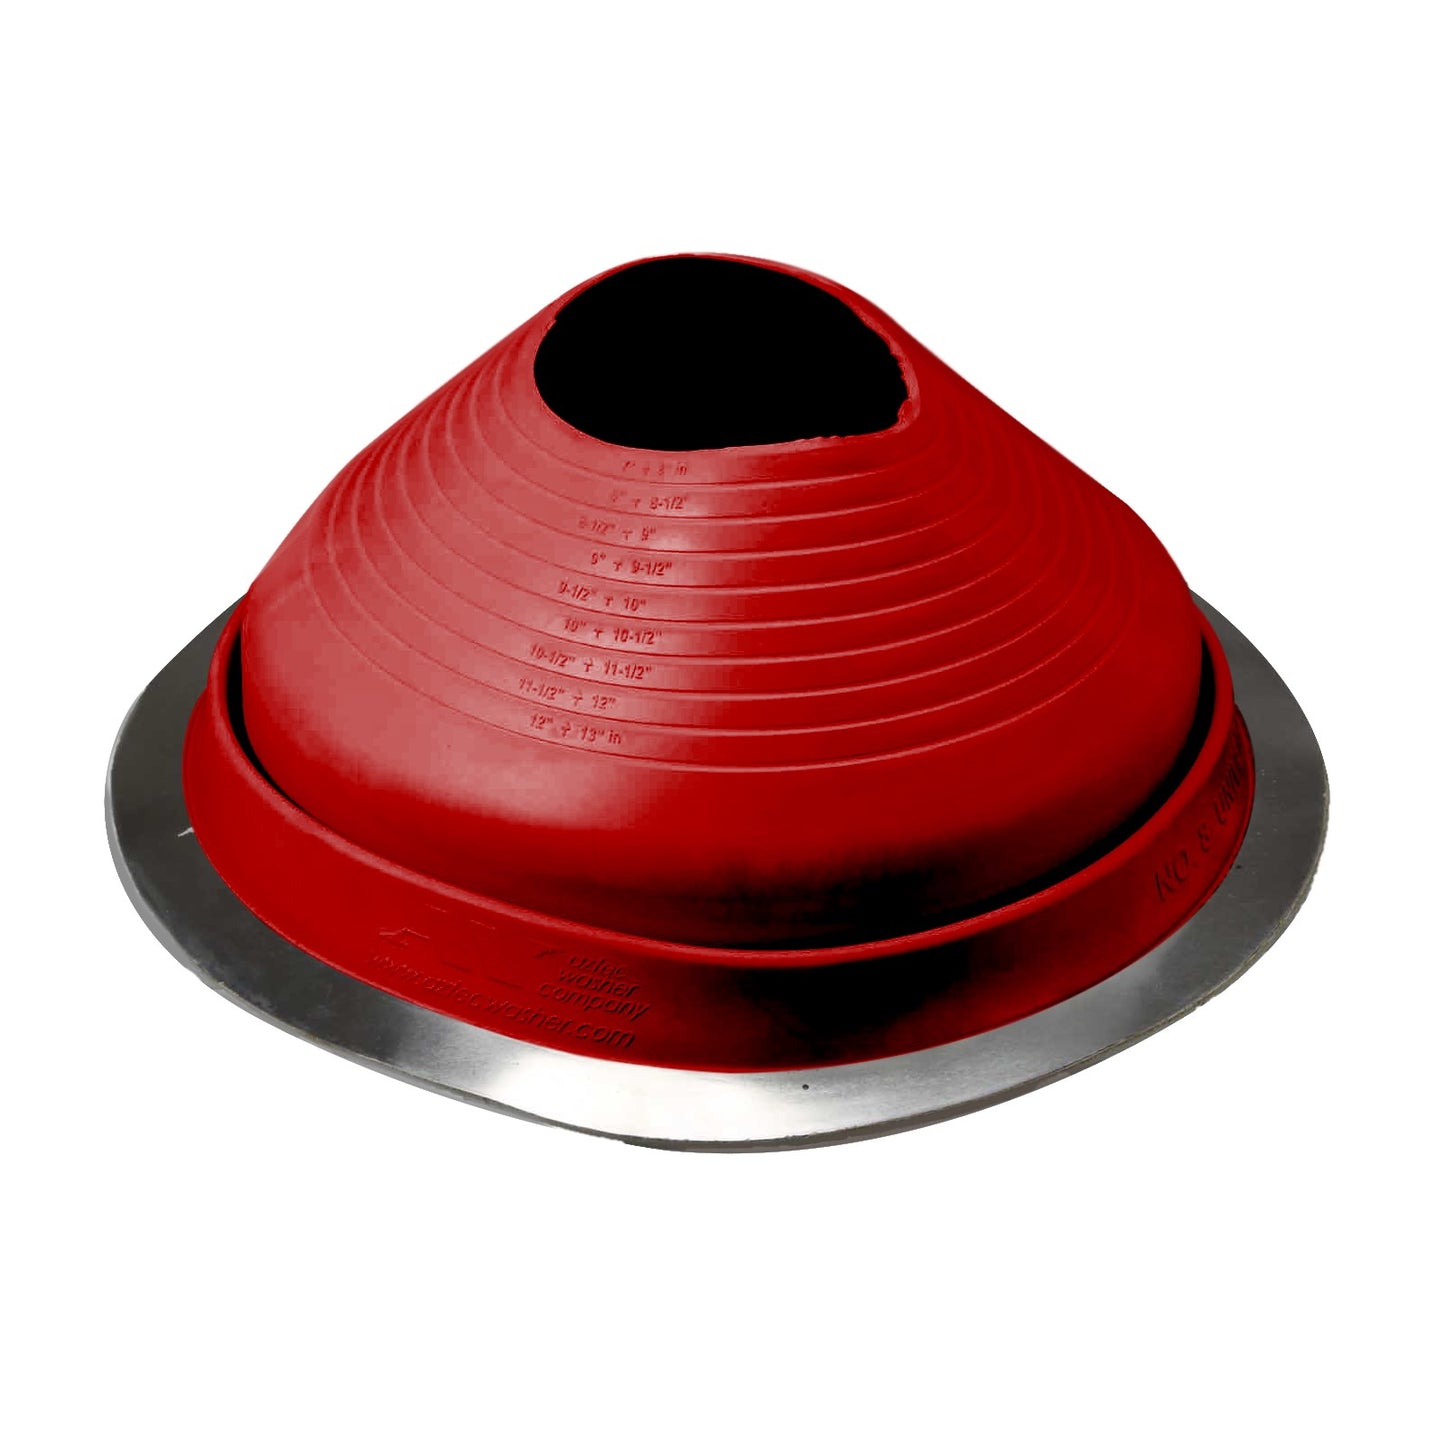 #8 Roofjack Round EPDM Pipe Flashing Boot Bright Red